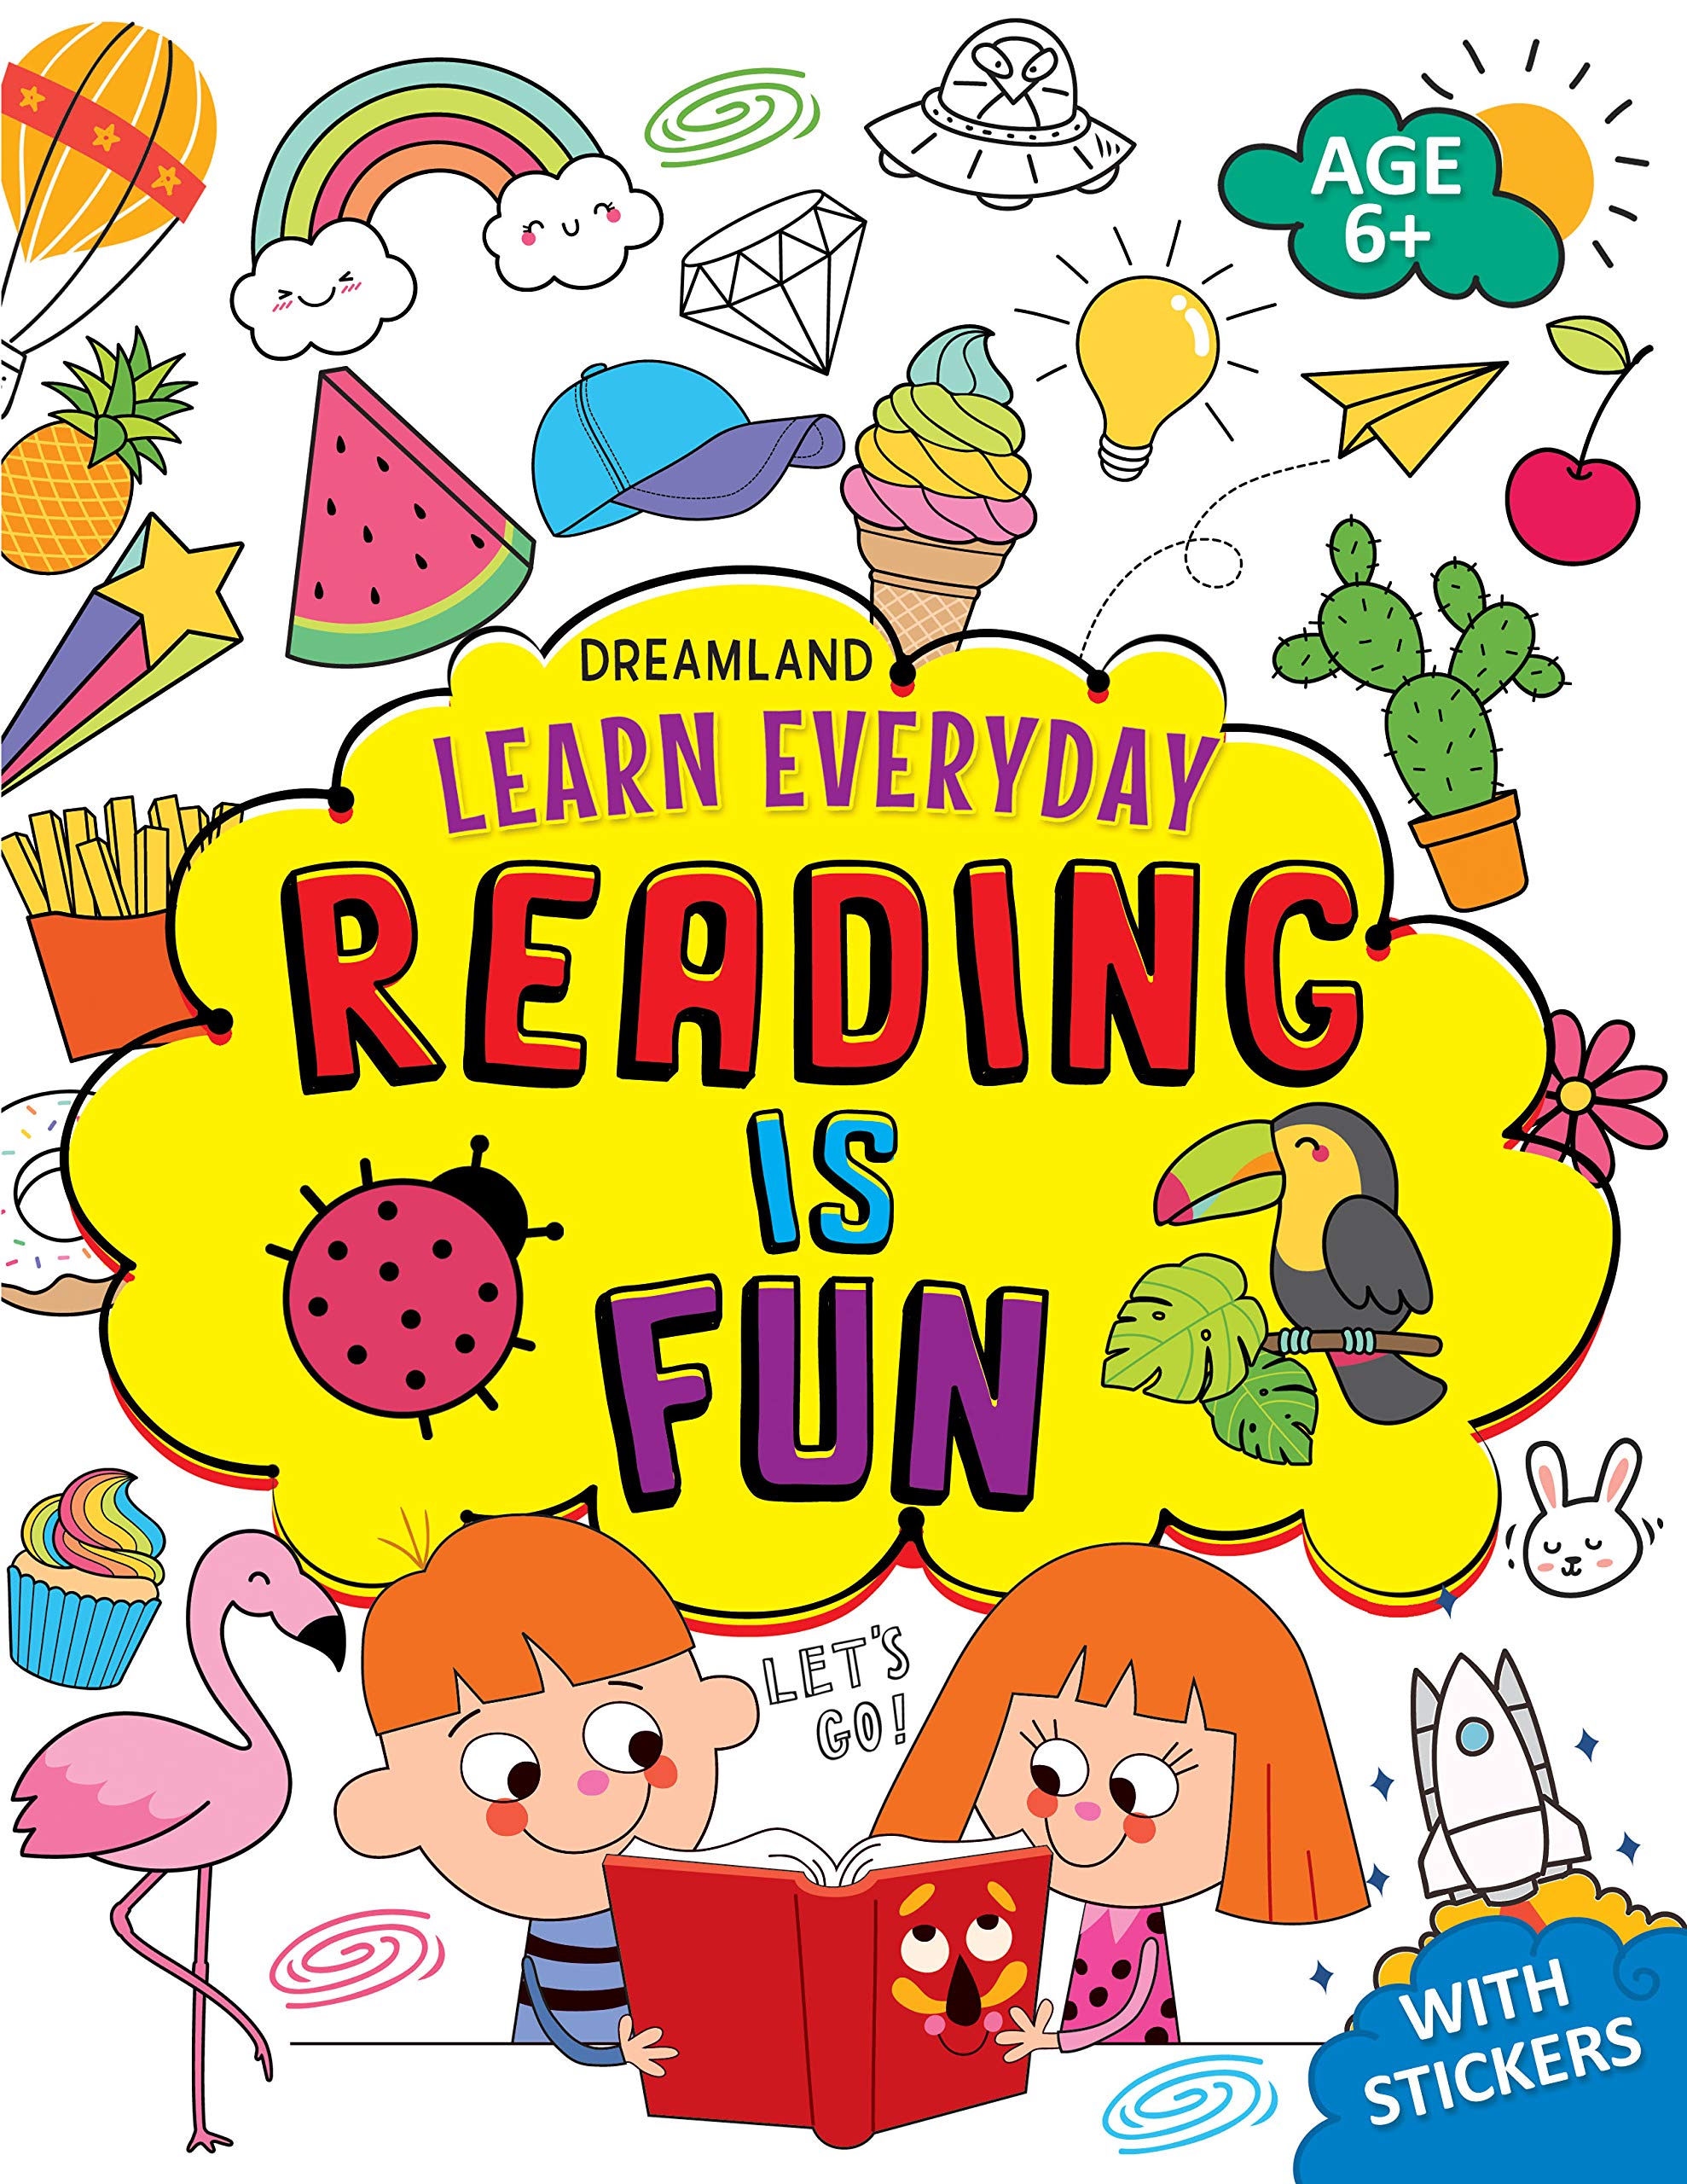 Reading is Fun with Stickers - Learn Everyday Series For Children Paperback